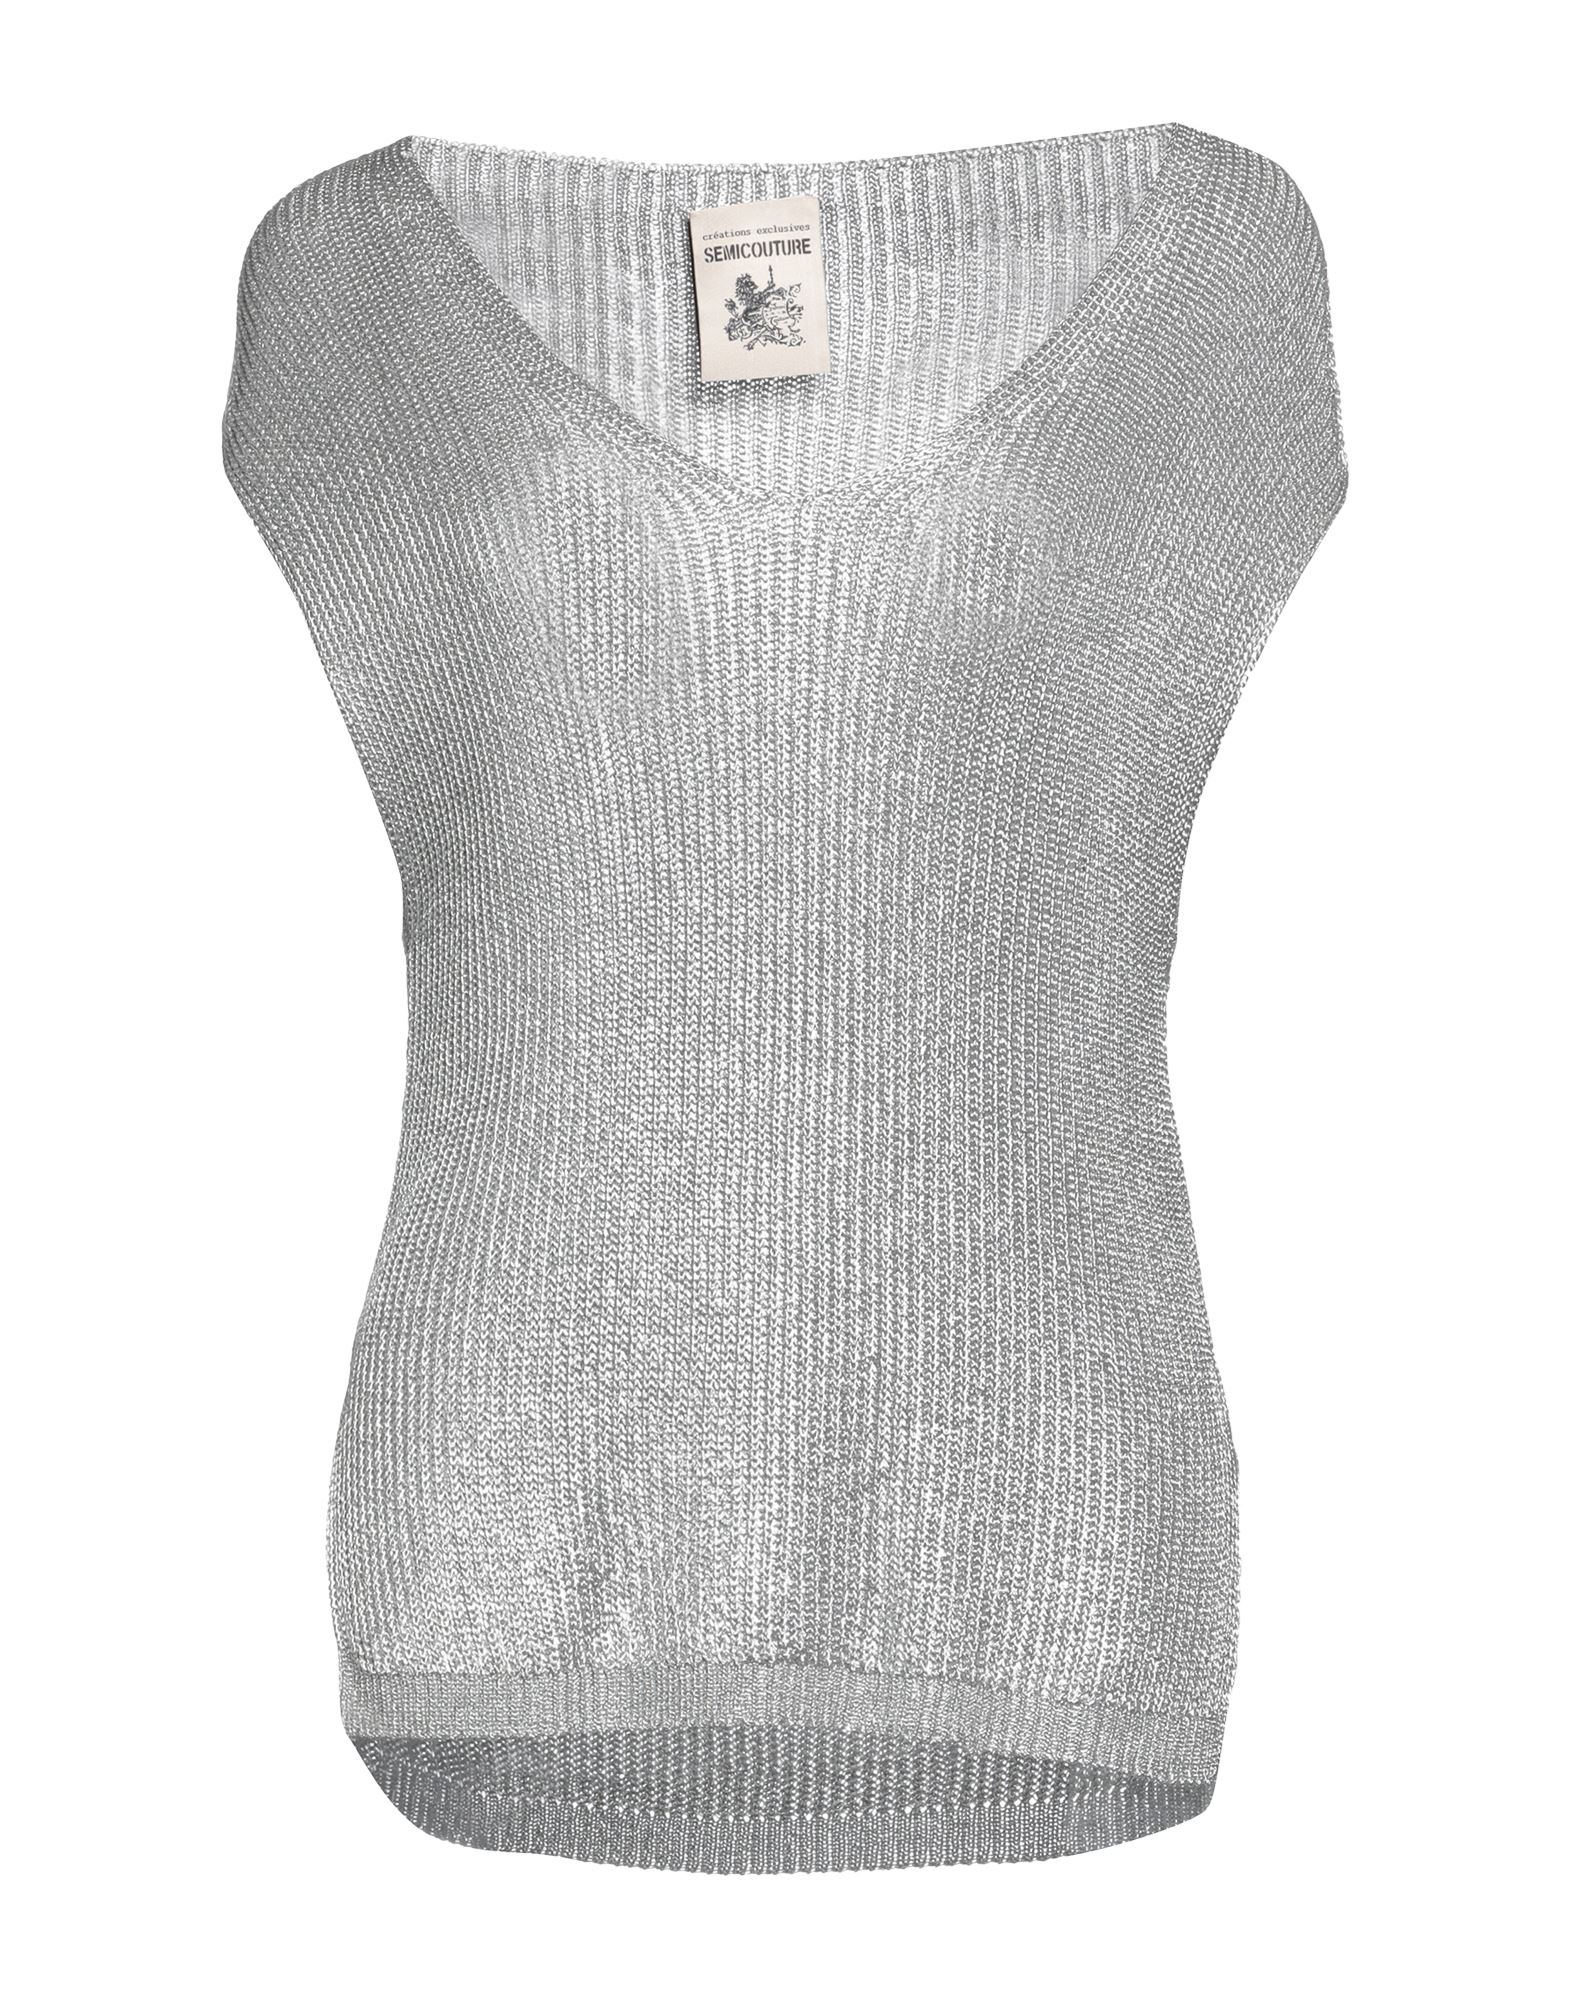 Semicouture Sweaters In Silver